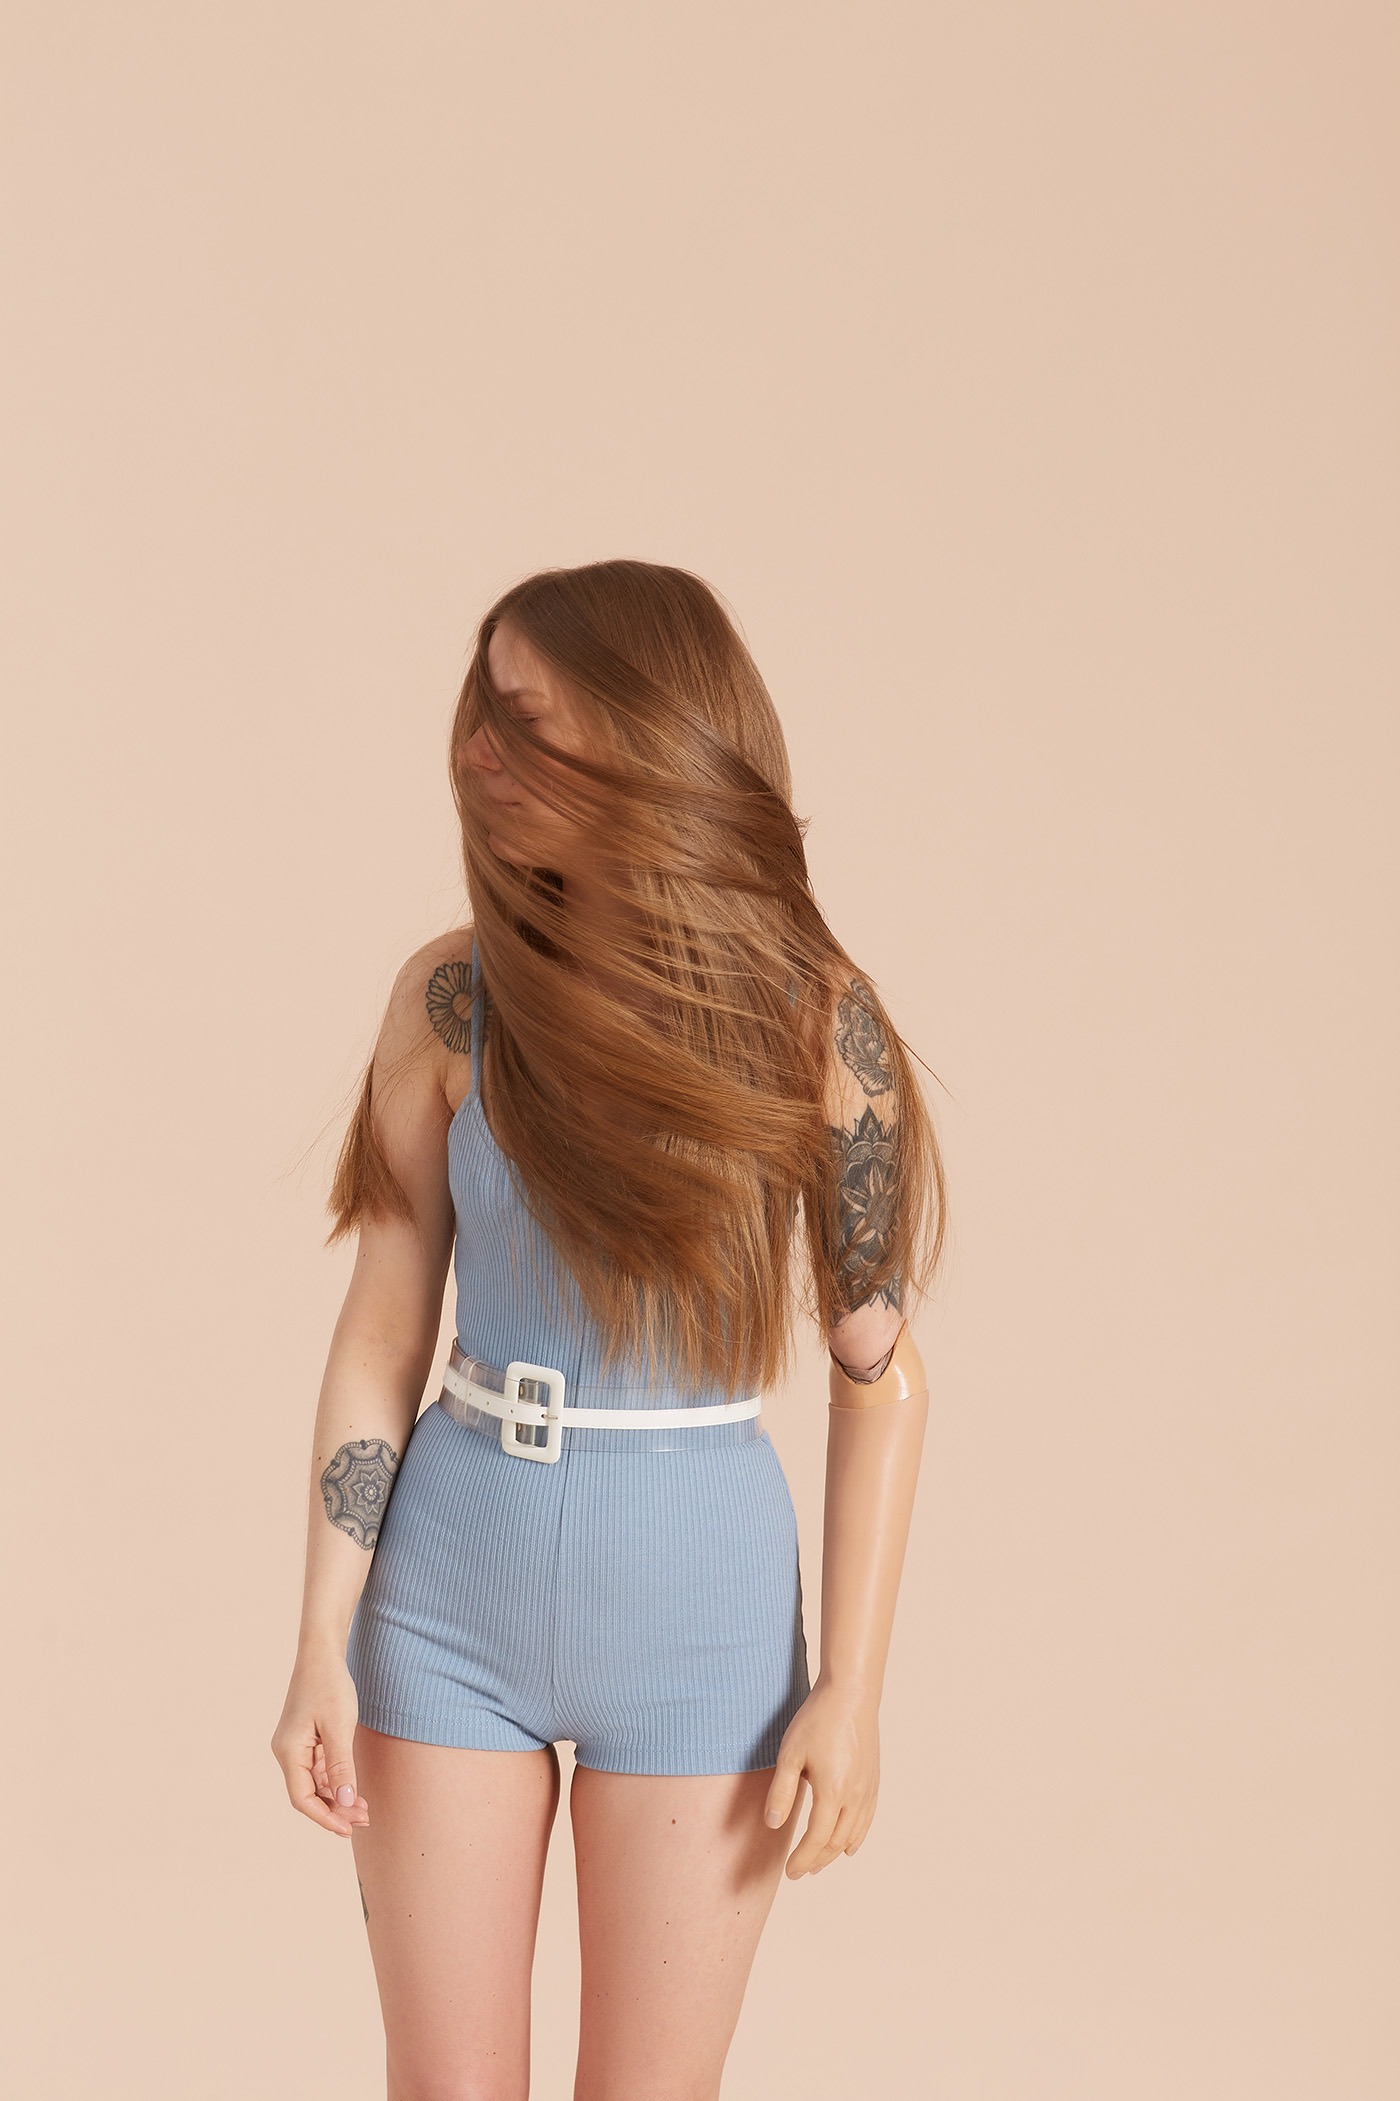 Disabled girl with beautiful long hair wearing blue bodysuit shaking her head